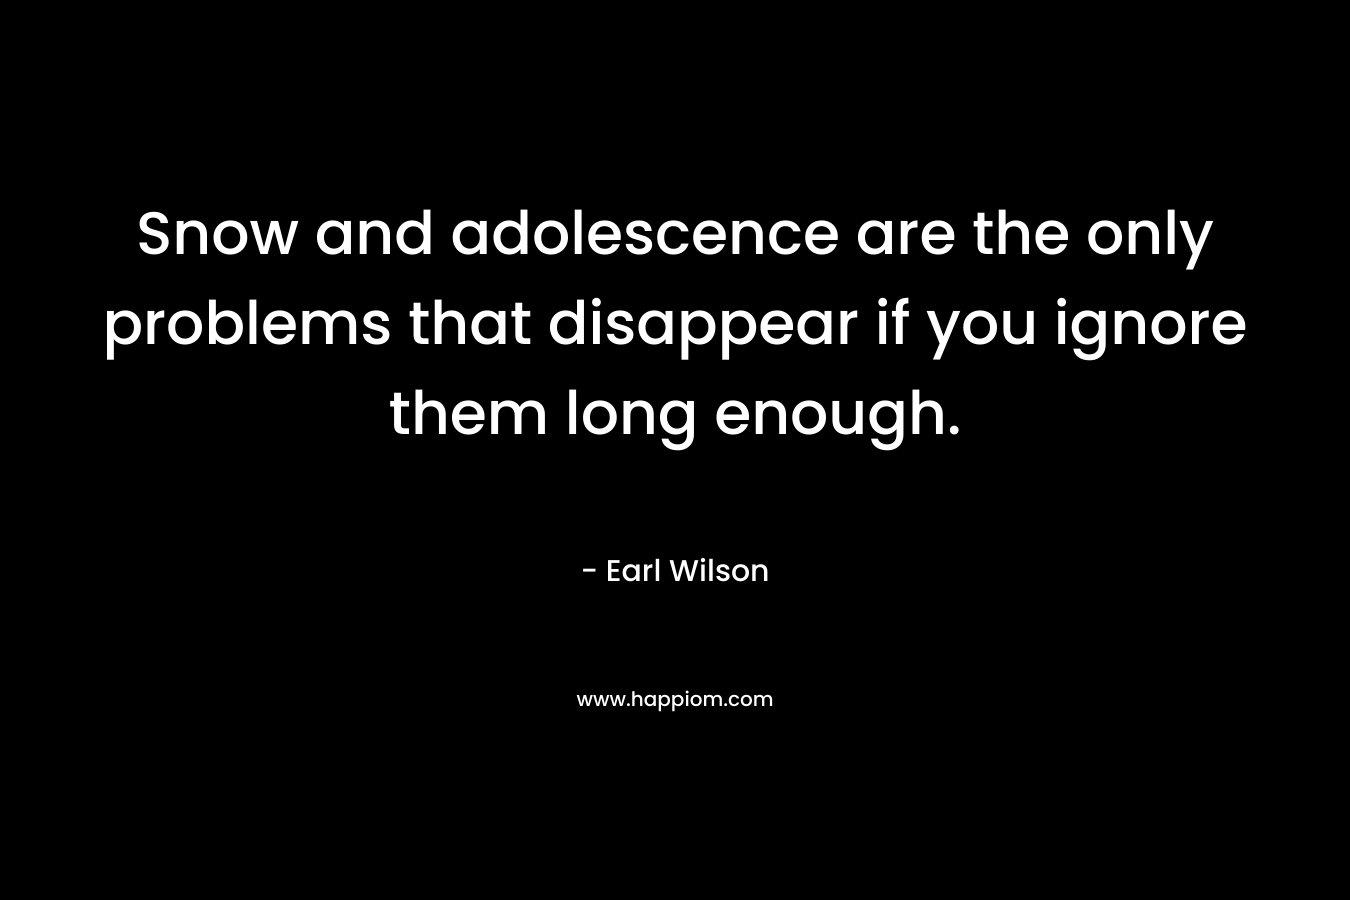 Snow and adolescence are the only problems that disappear if you ignore them long enough. – Earl Wilson